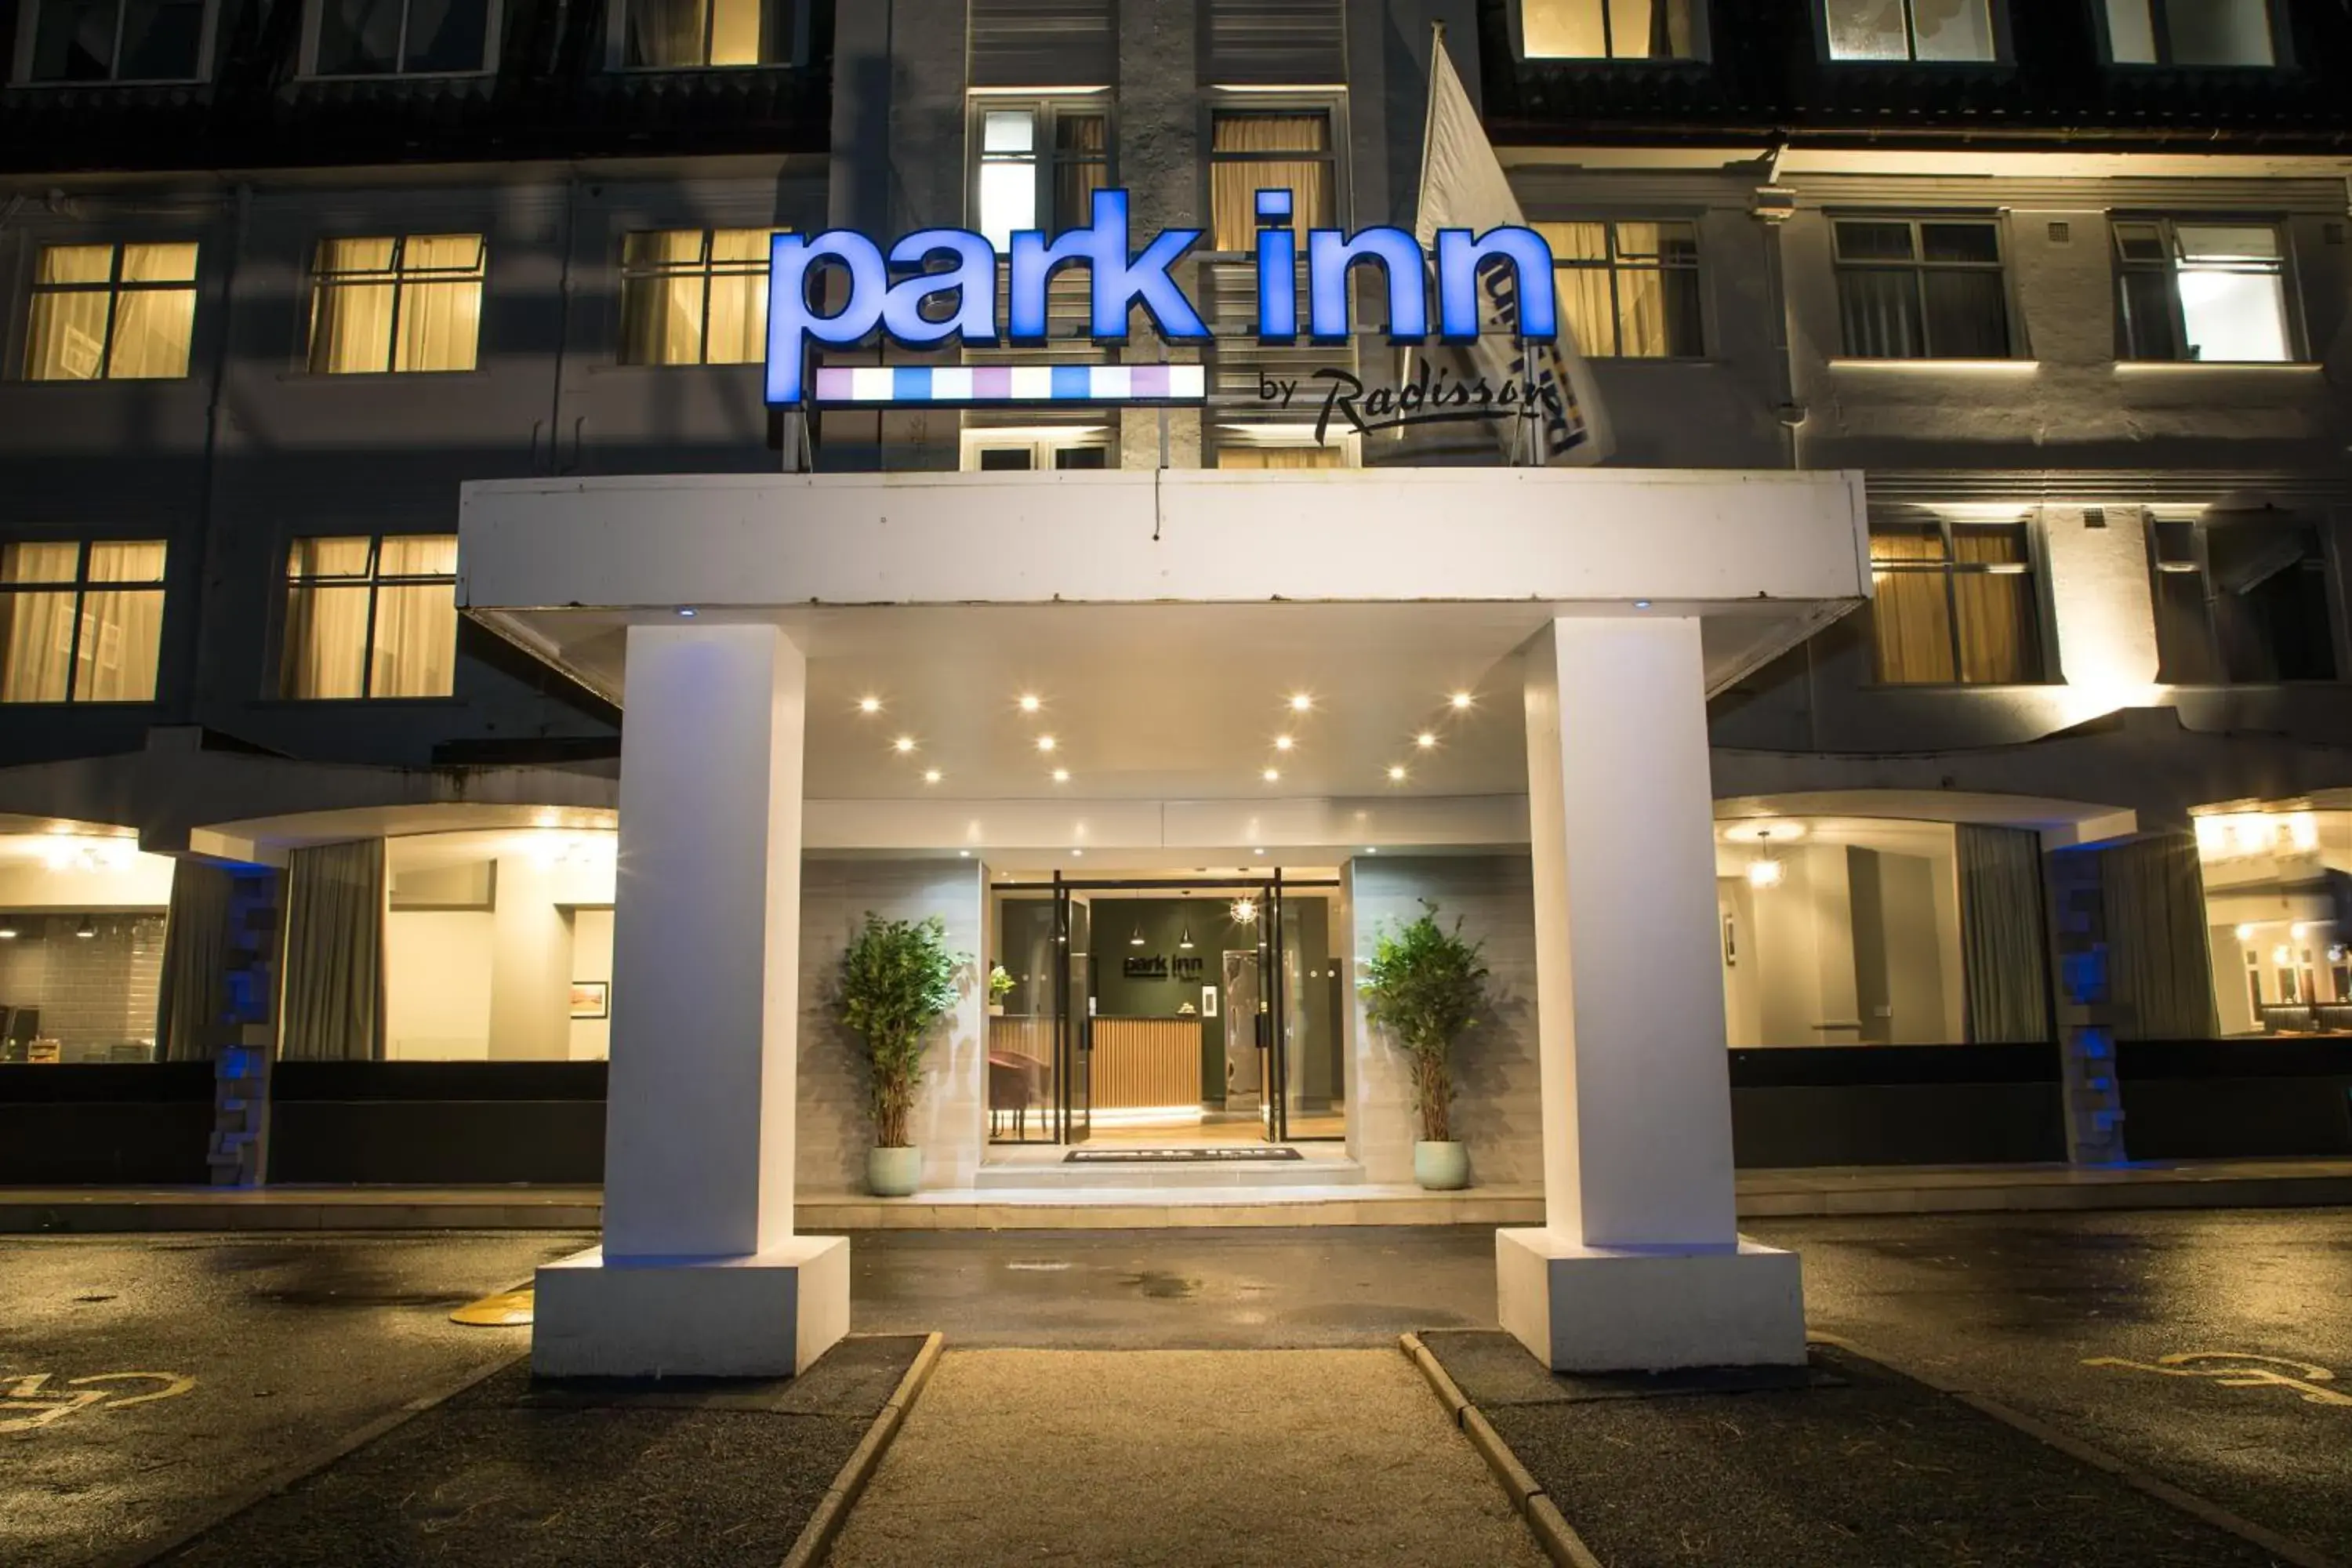 Property logo or sign in Park Inn by Radisson Bournemouth